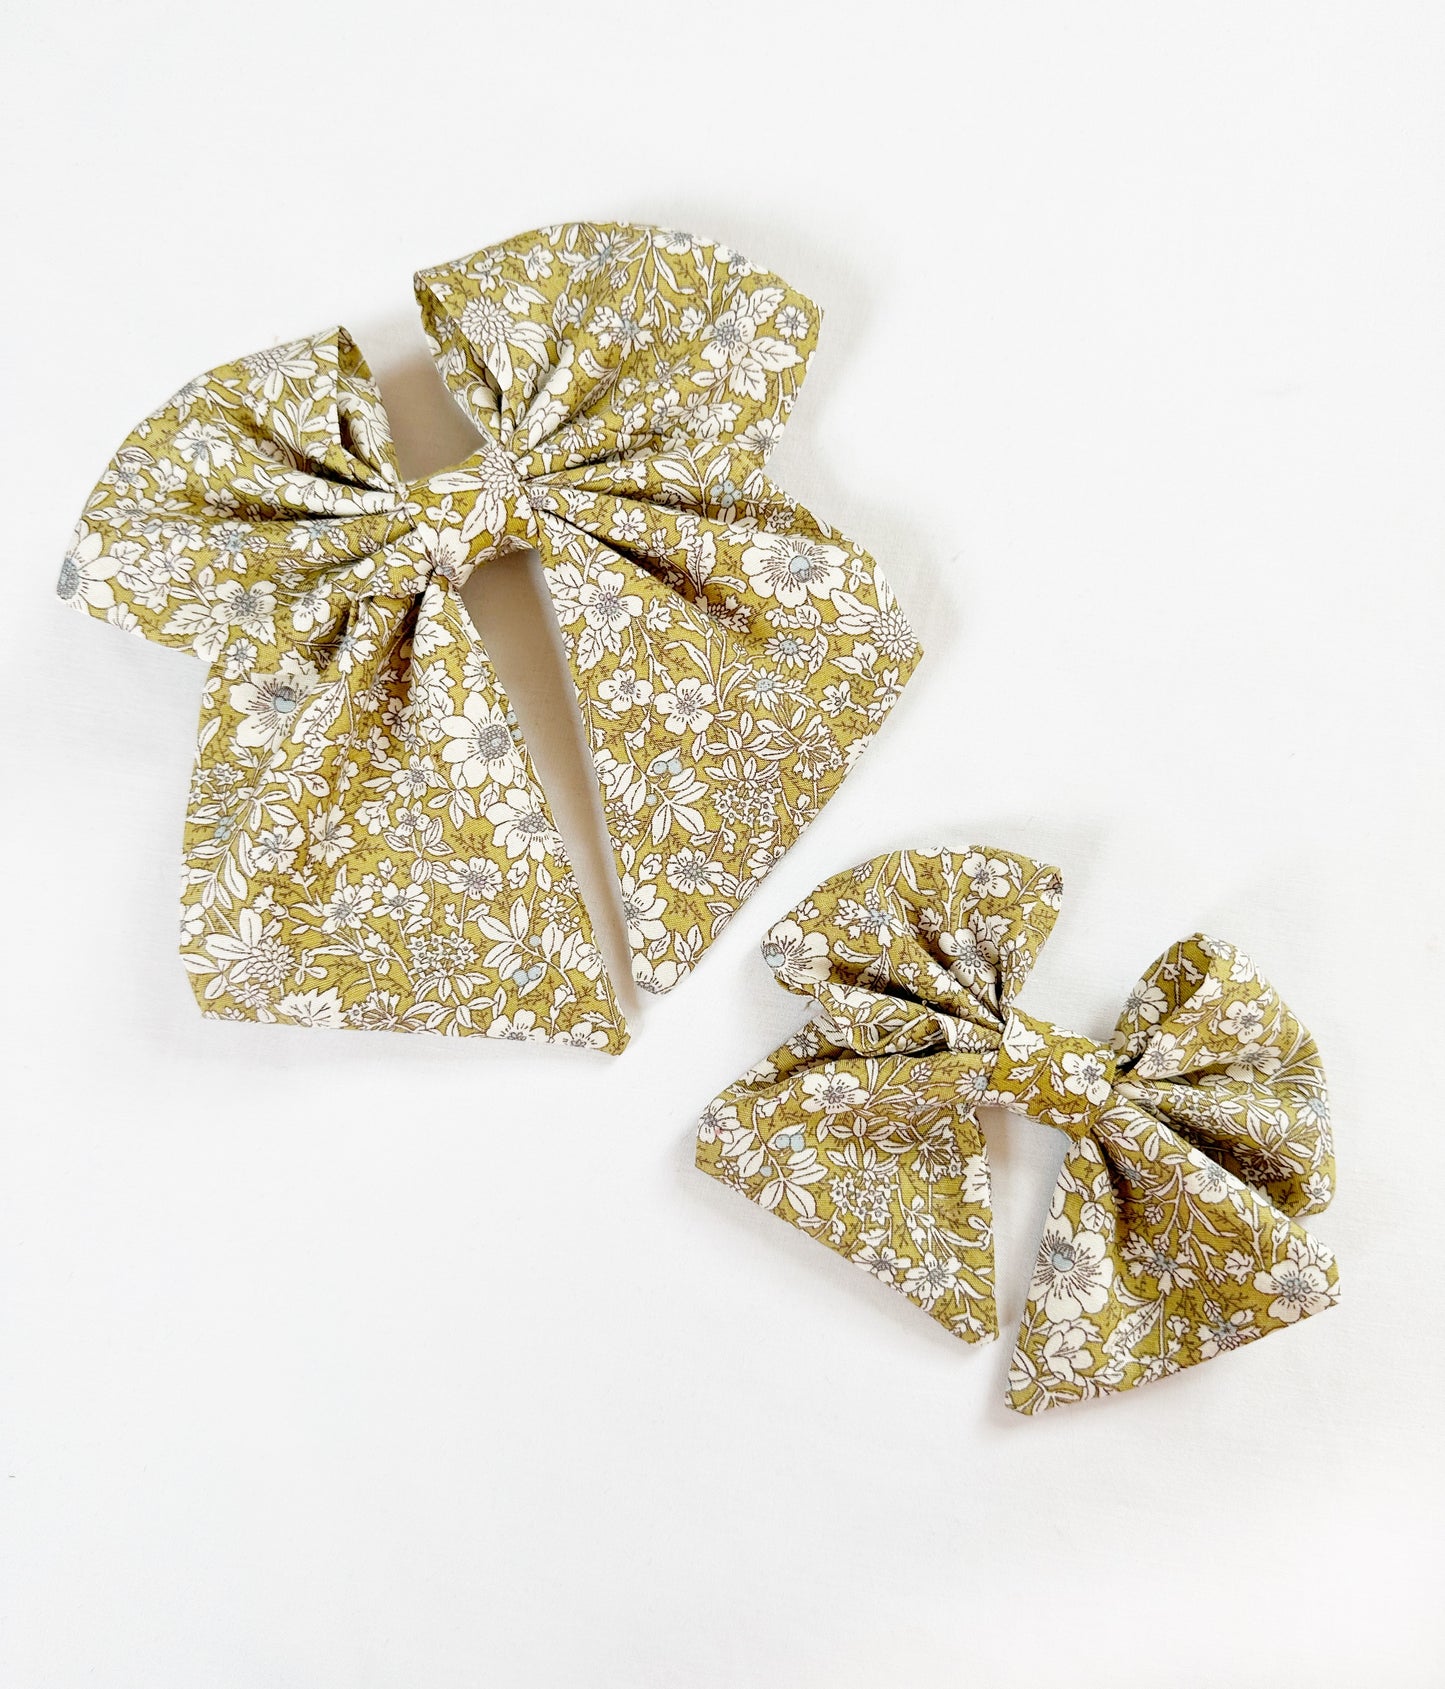 Hair Bow gift set in green meadow floral